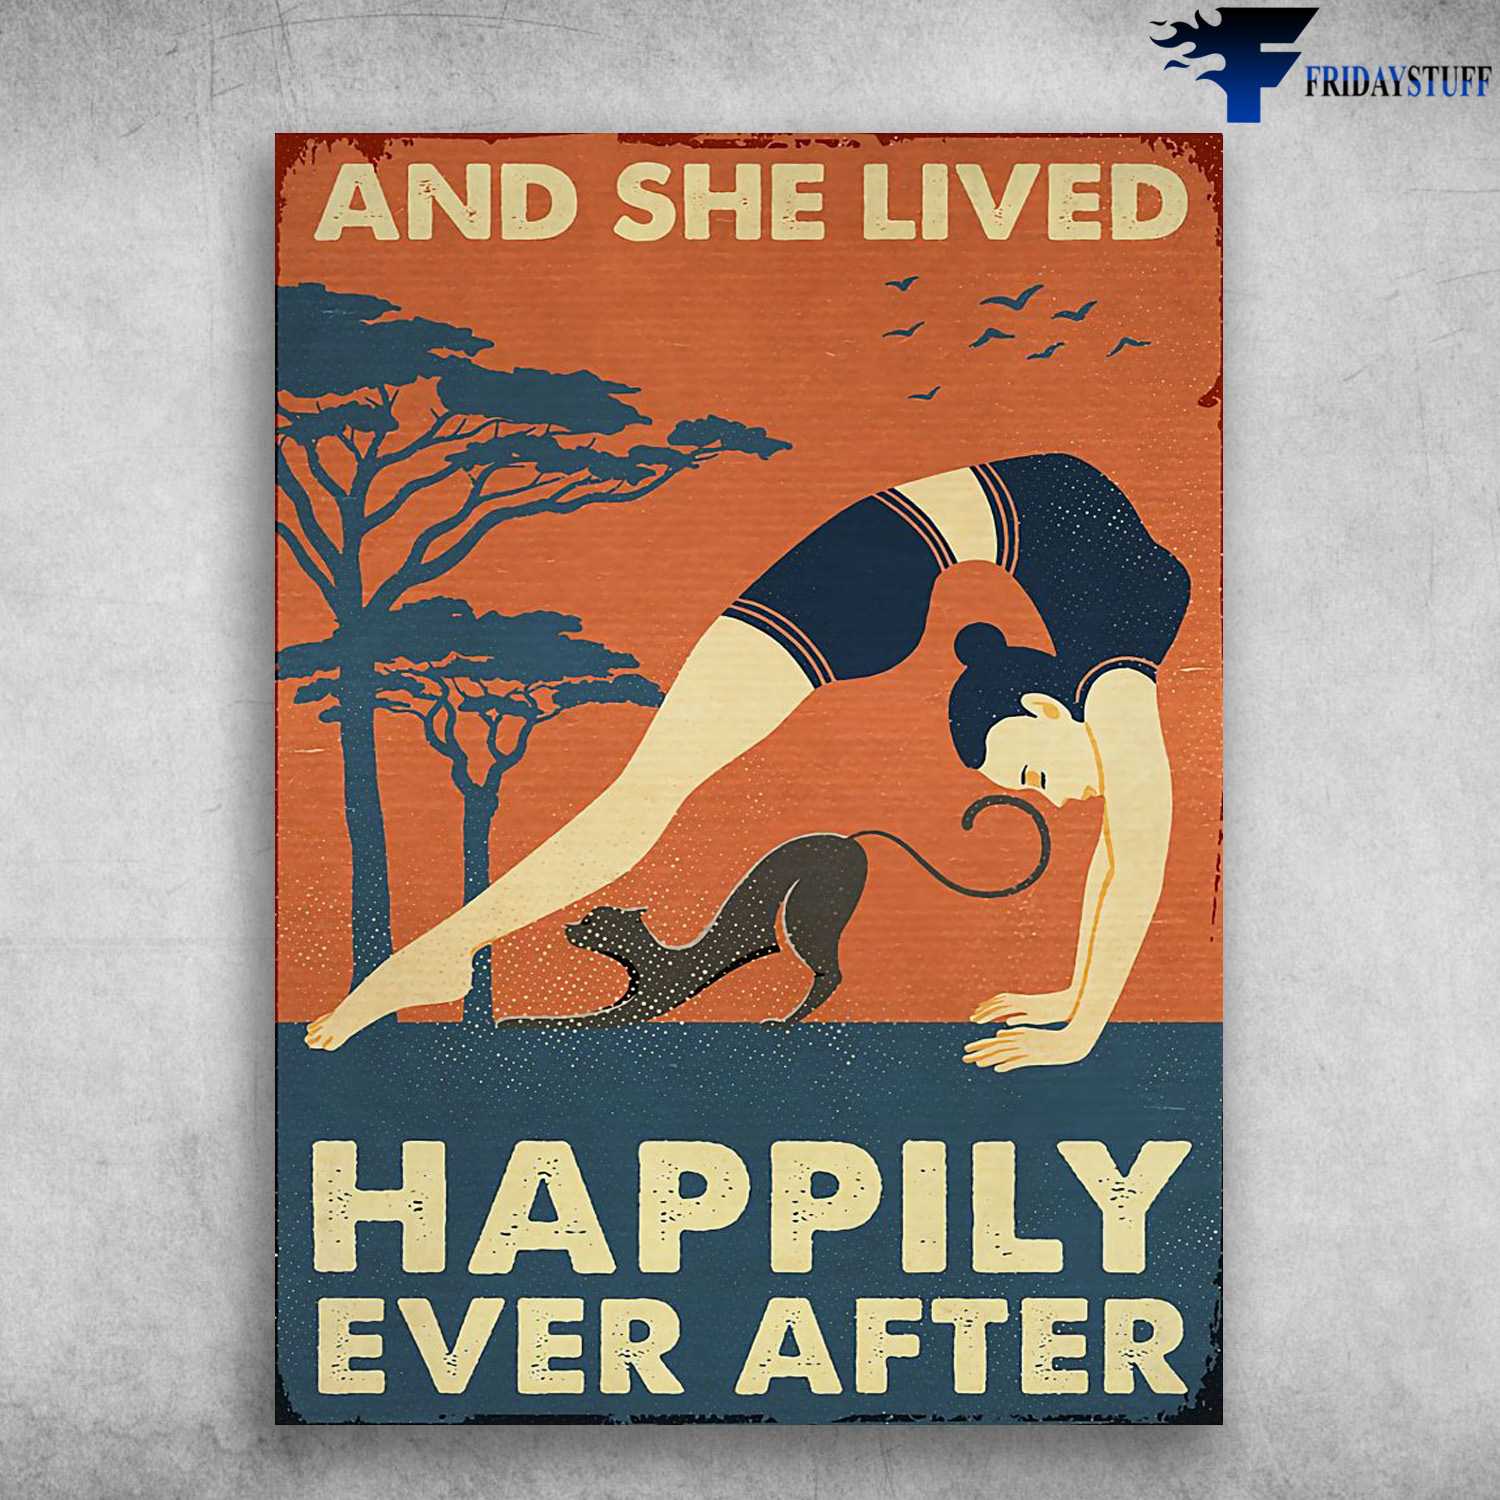 Yoga With Cat, Yoga Girl, And She Lived, Happily Ever After